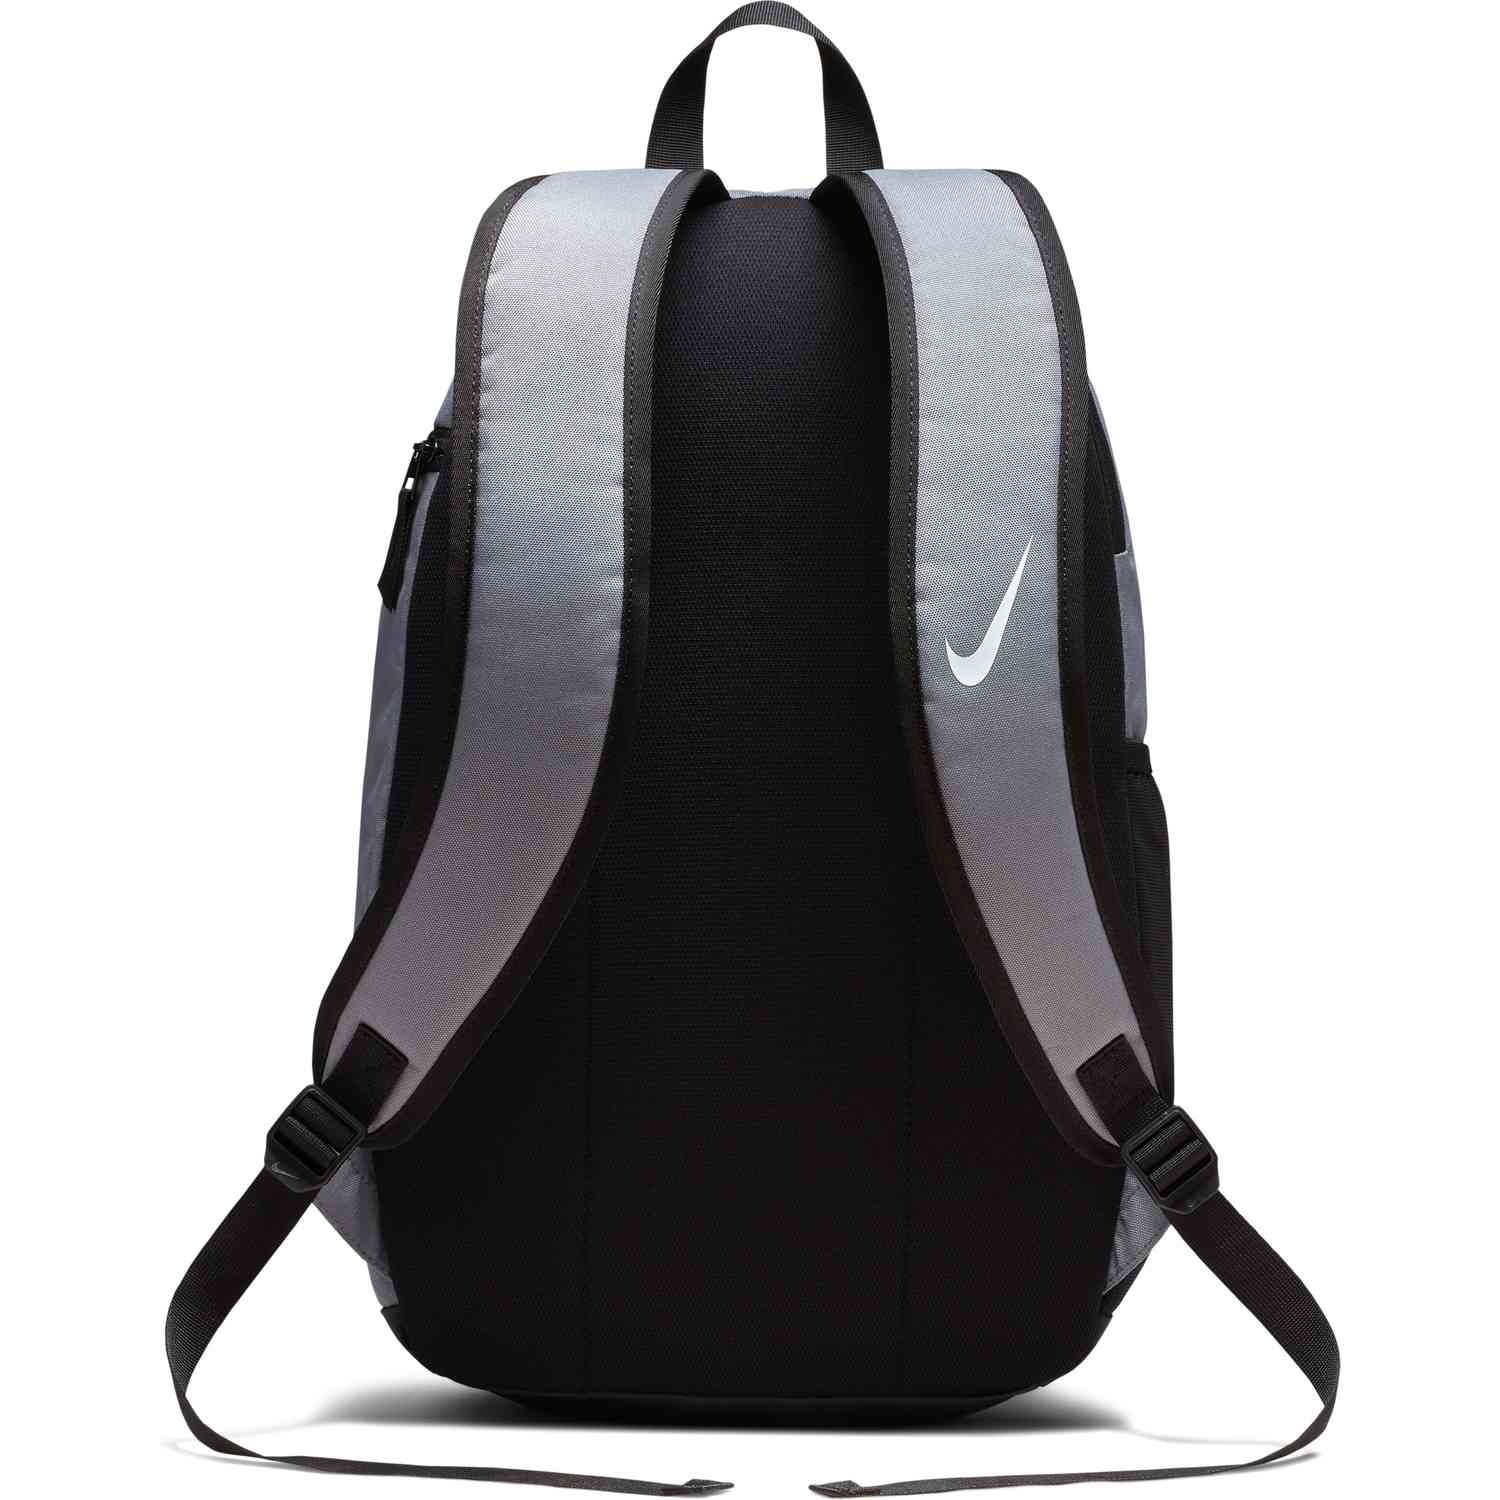 Make a name Dexterity difficult Nike Academy Team Backpack - Cool Grey - SoccerPro